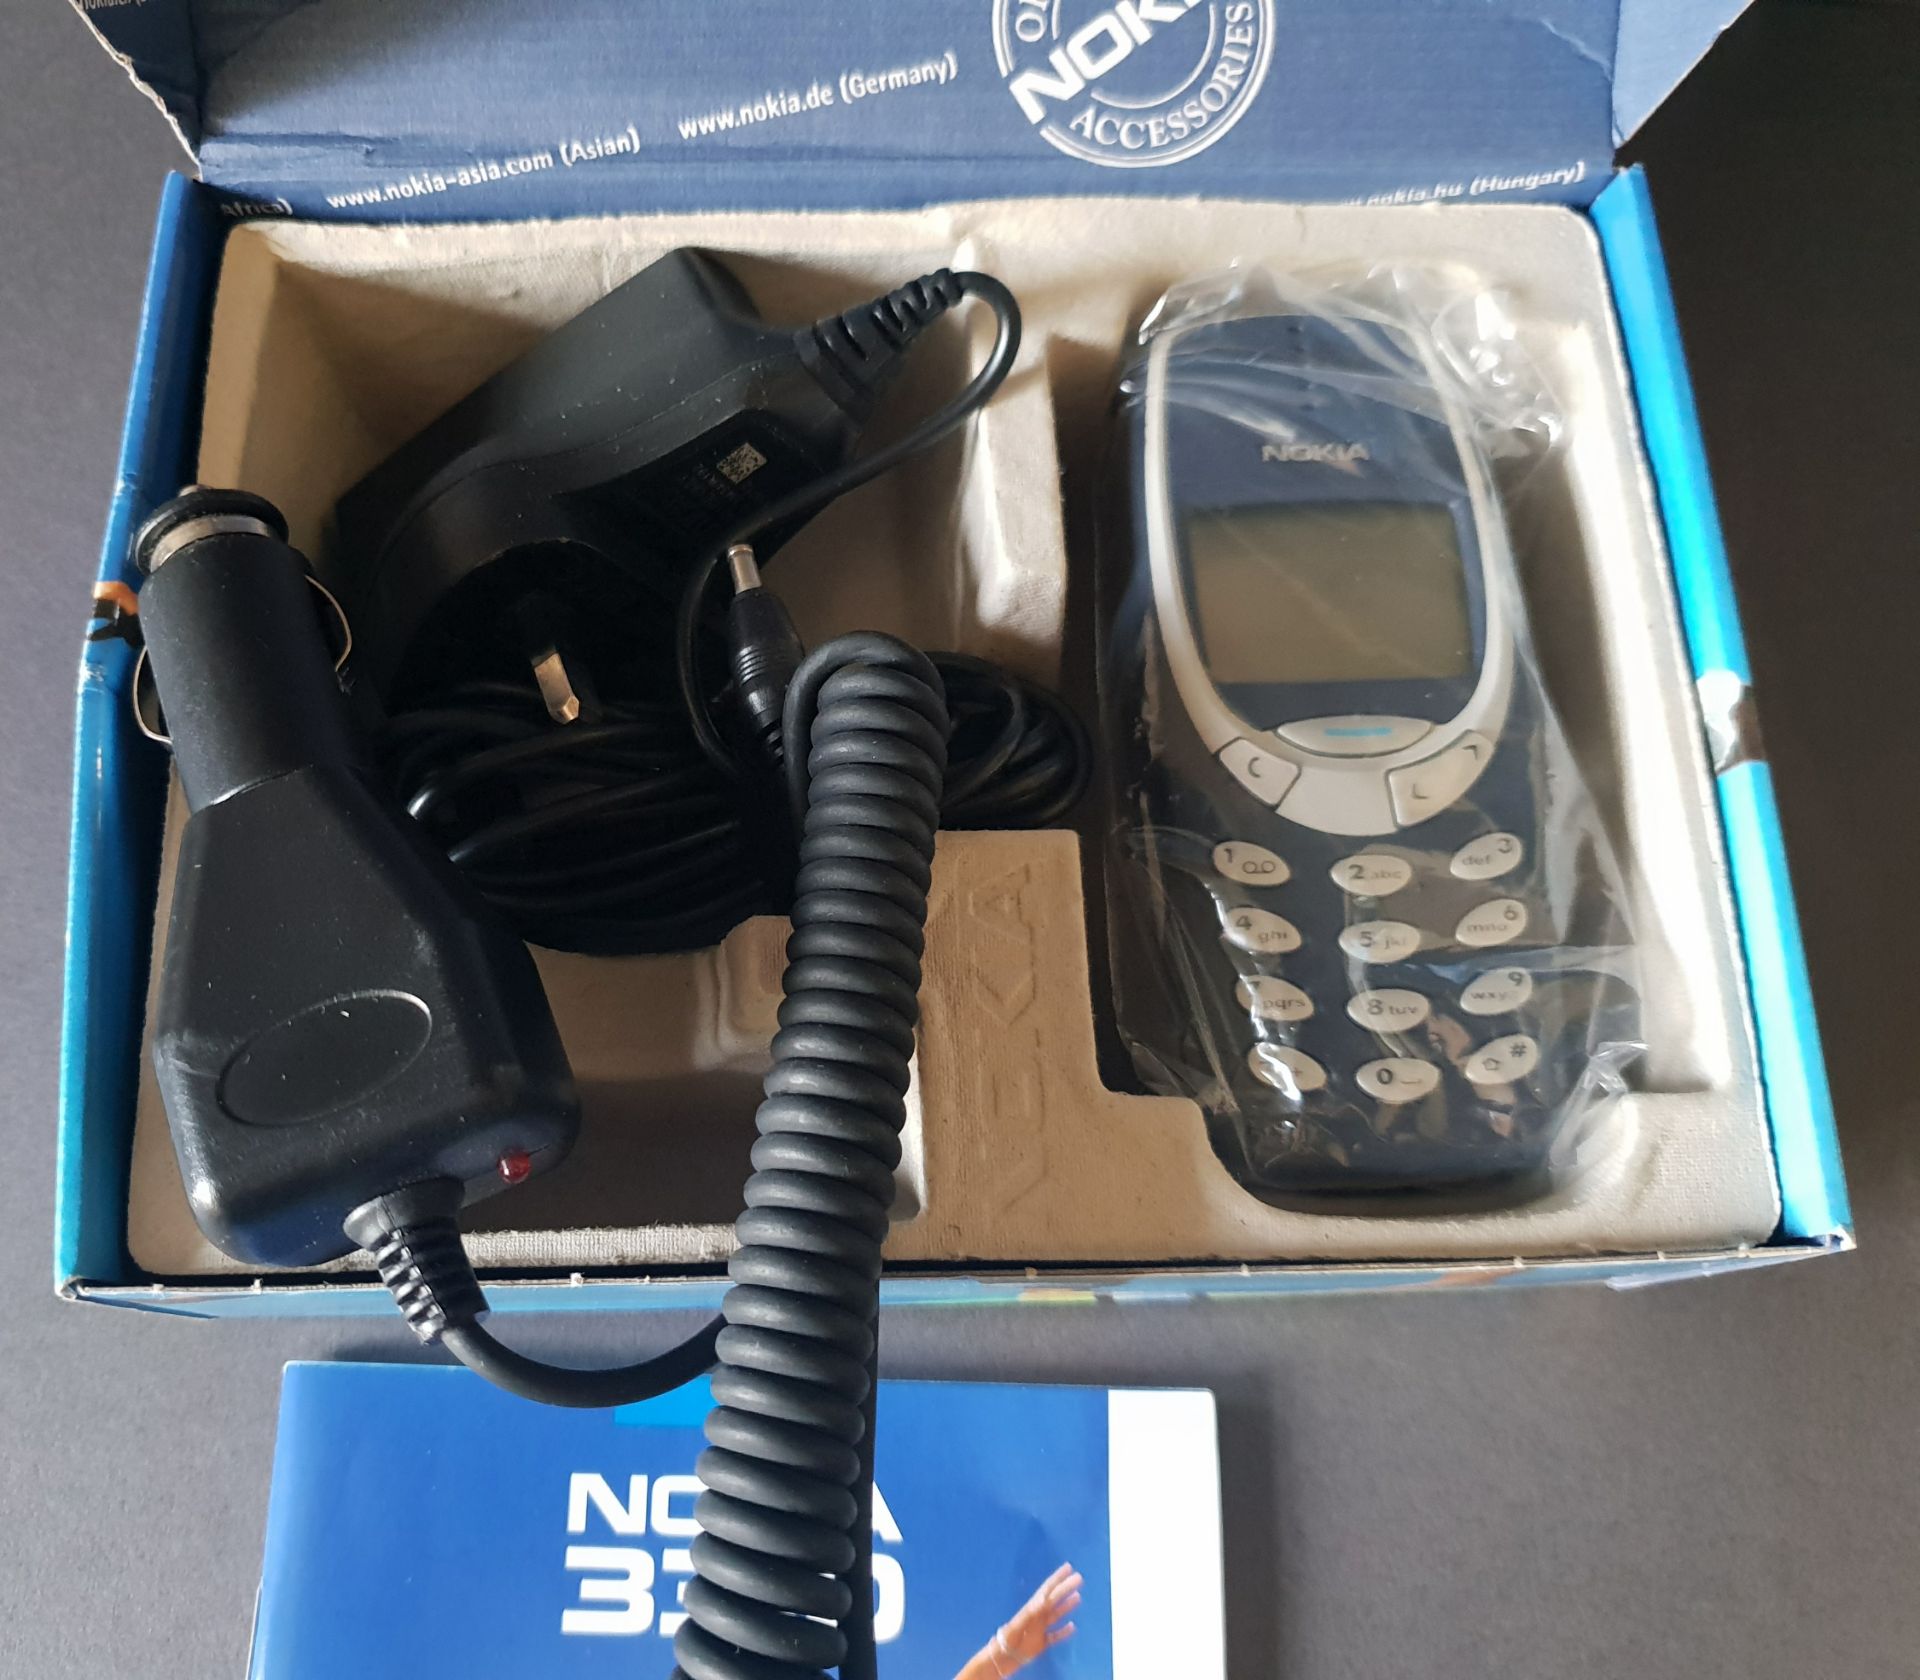 Vintage Retro Nokia 3310 Mobile Phone Boxed 2003 Includes Chargers - Image 3 of 3